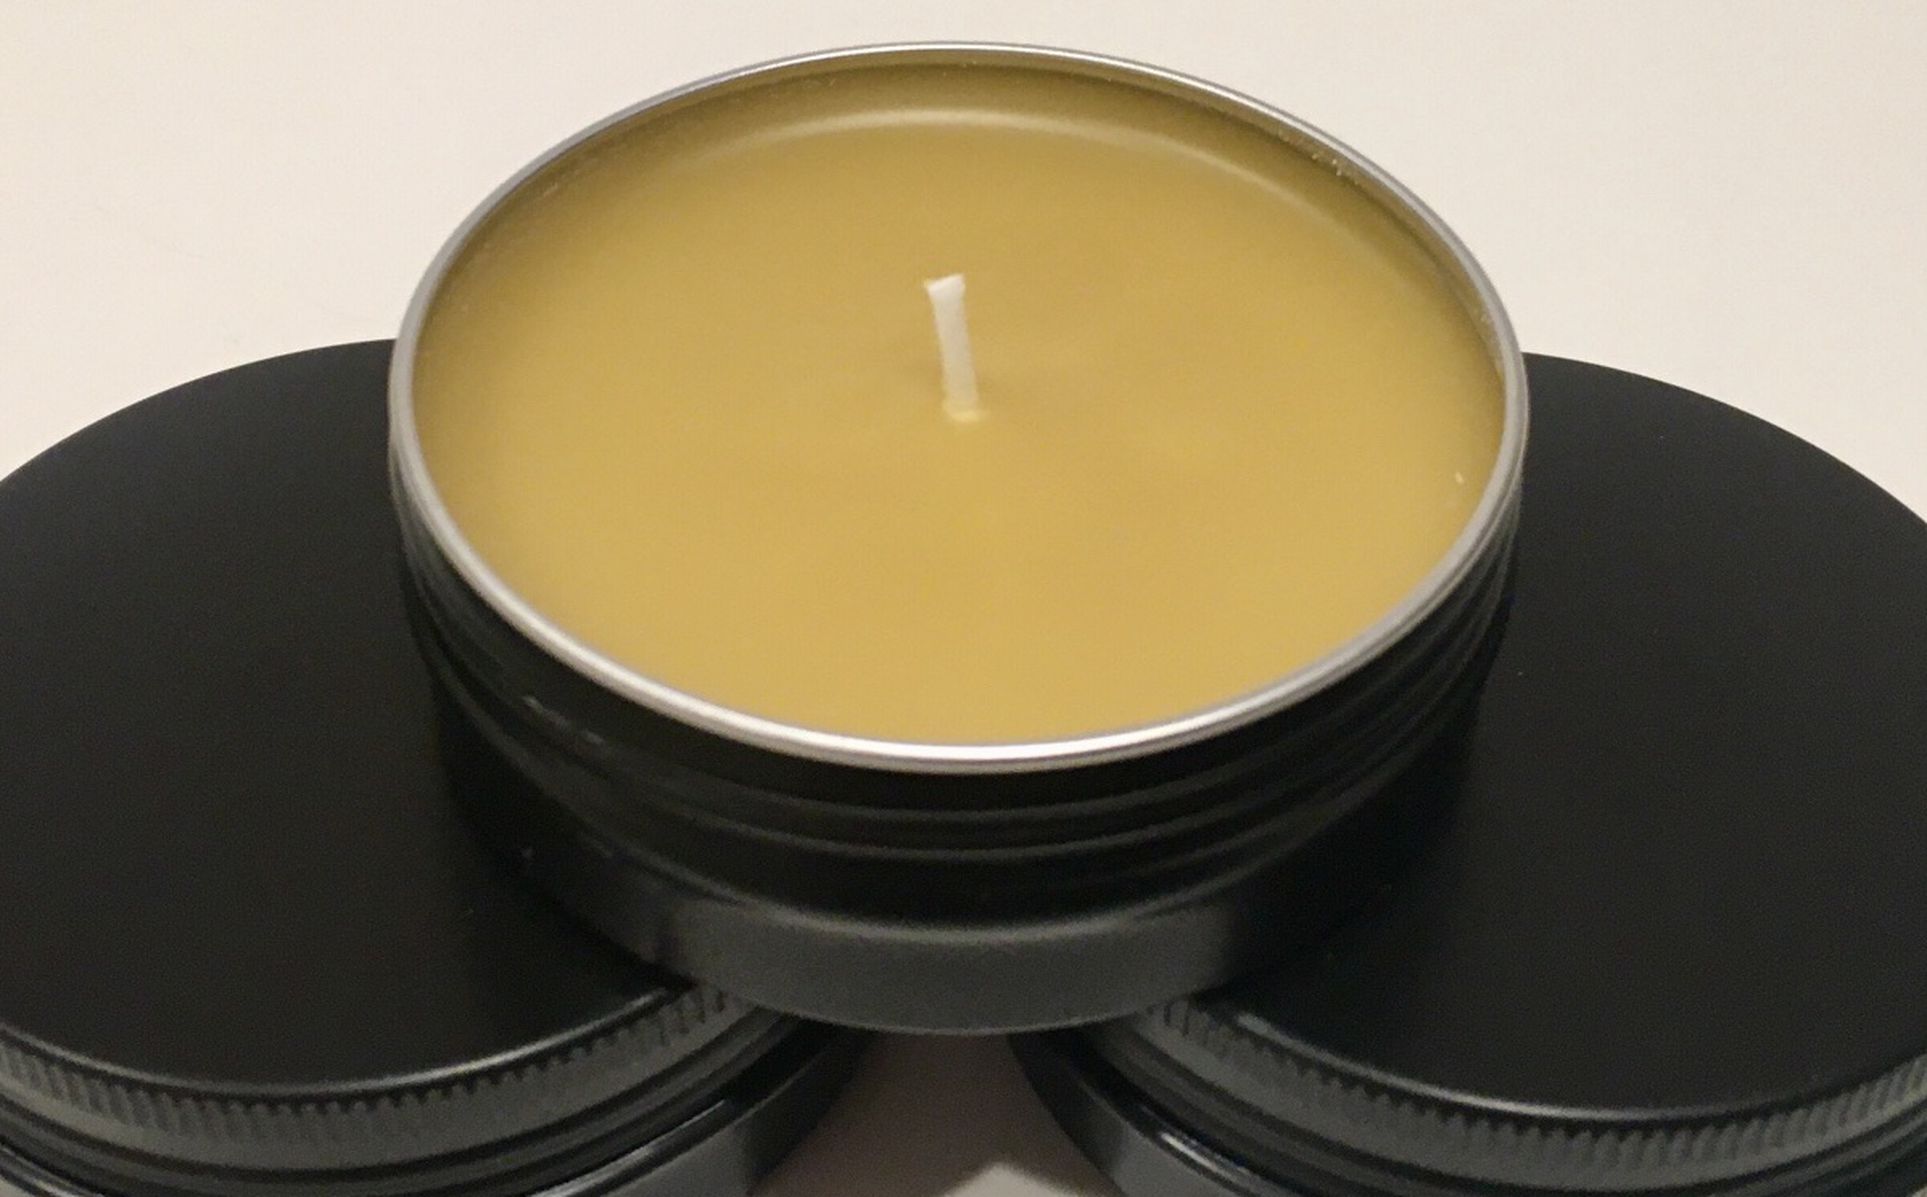 100% Pure Beeswax Tin Candle Sets